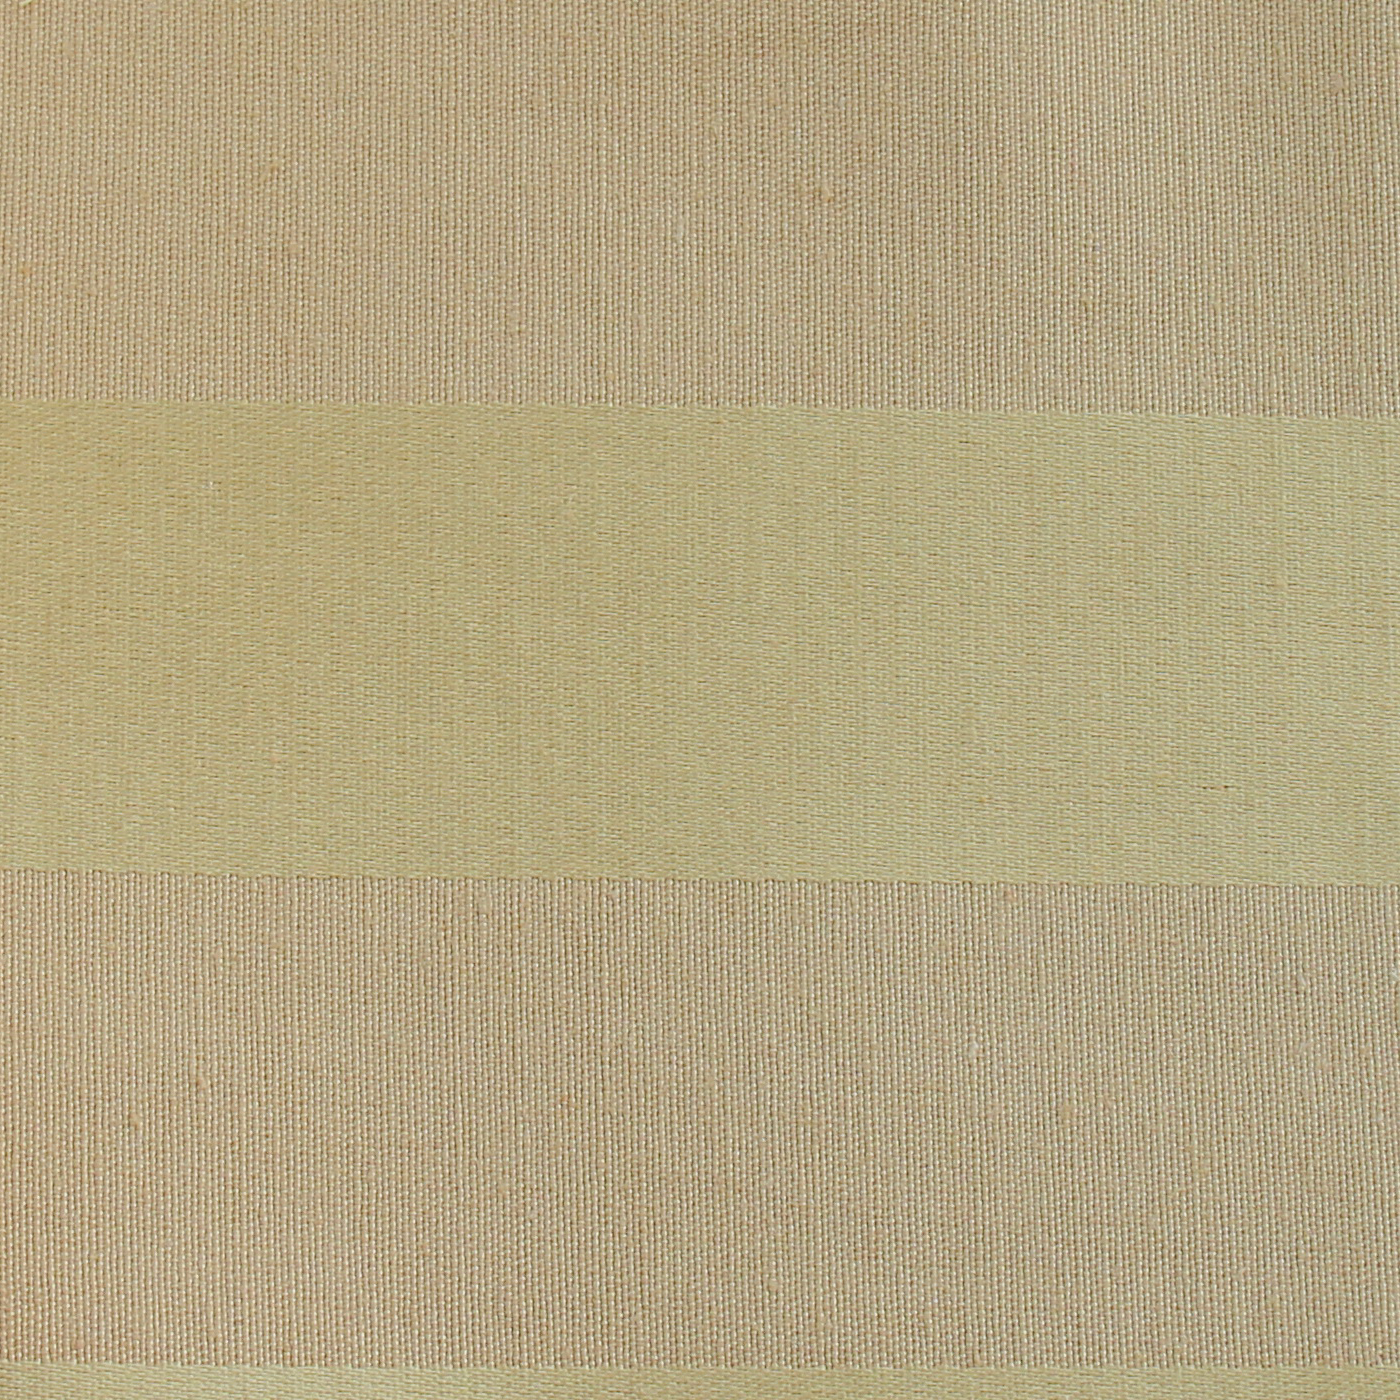 NO 15-45 RS X1 D NO 33 Fabric Upholstery Sample